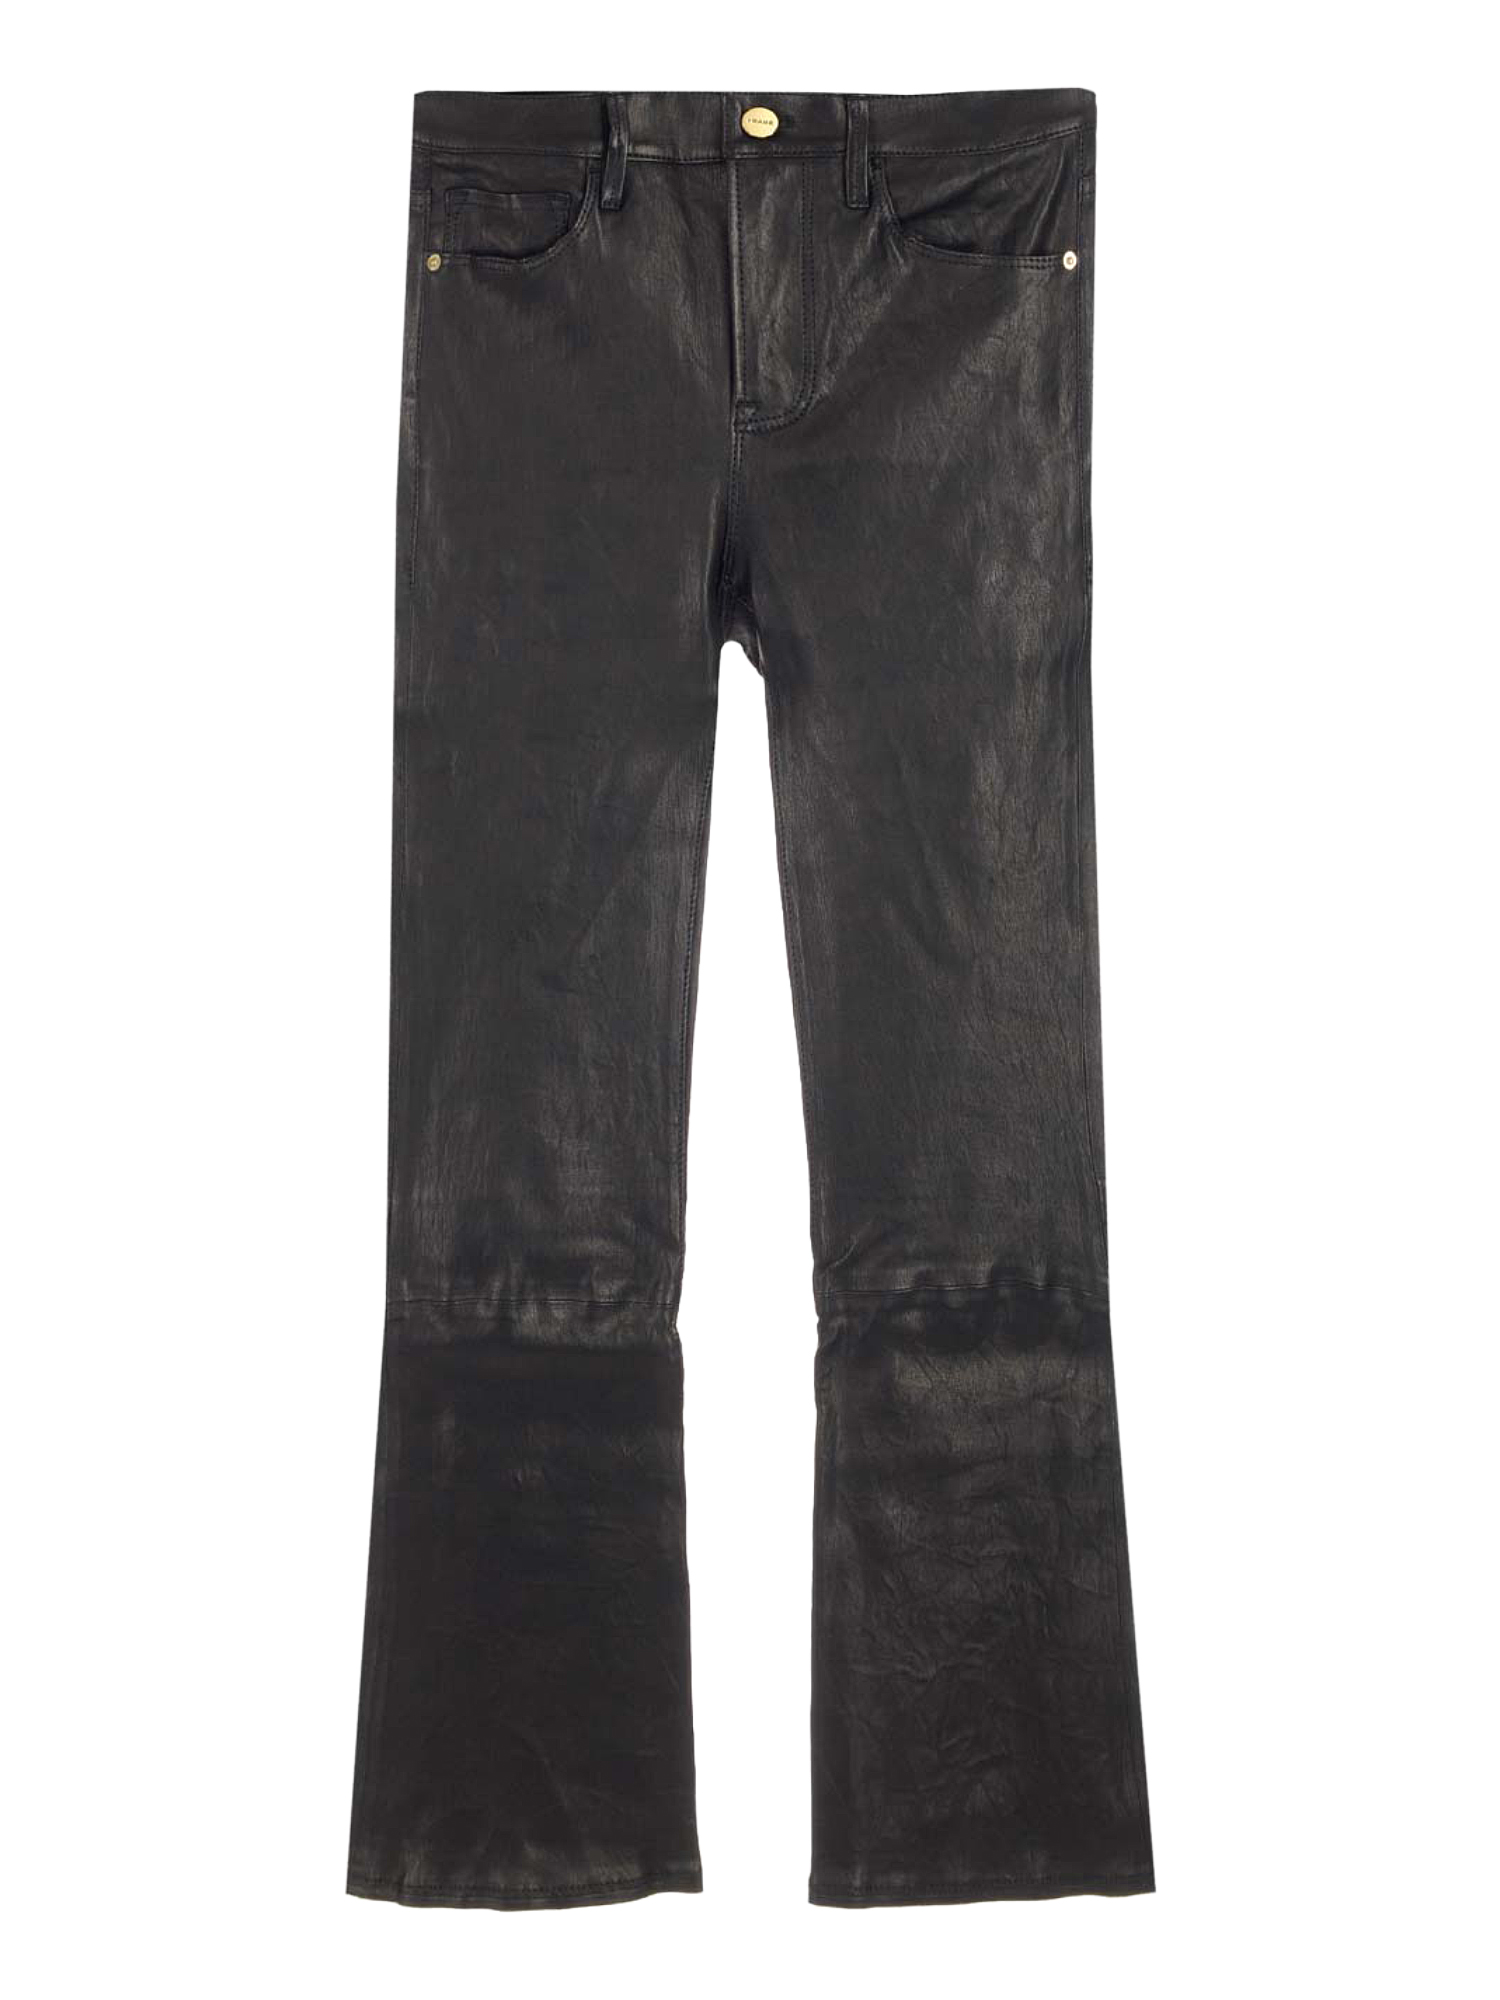 Condition: New With Tag,  Leather, Color: Black - M - Denim 28 -